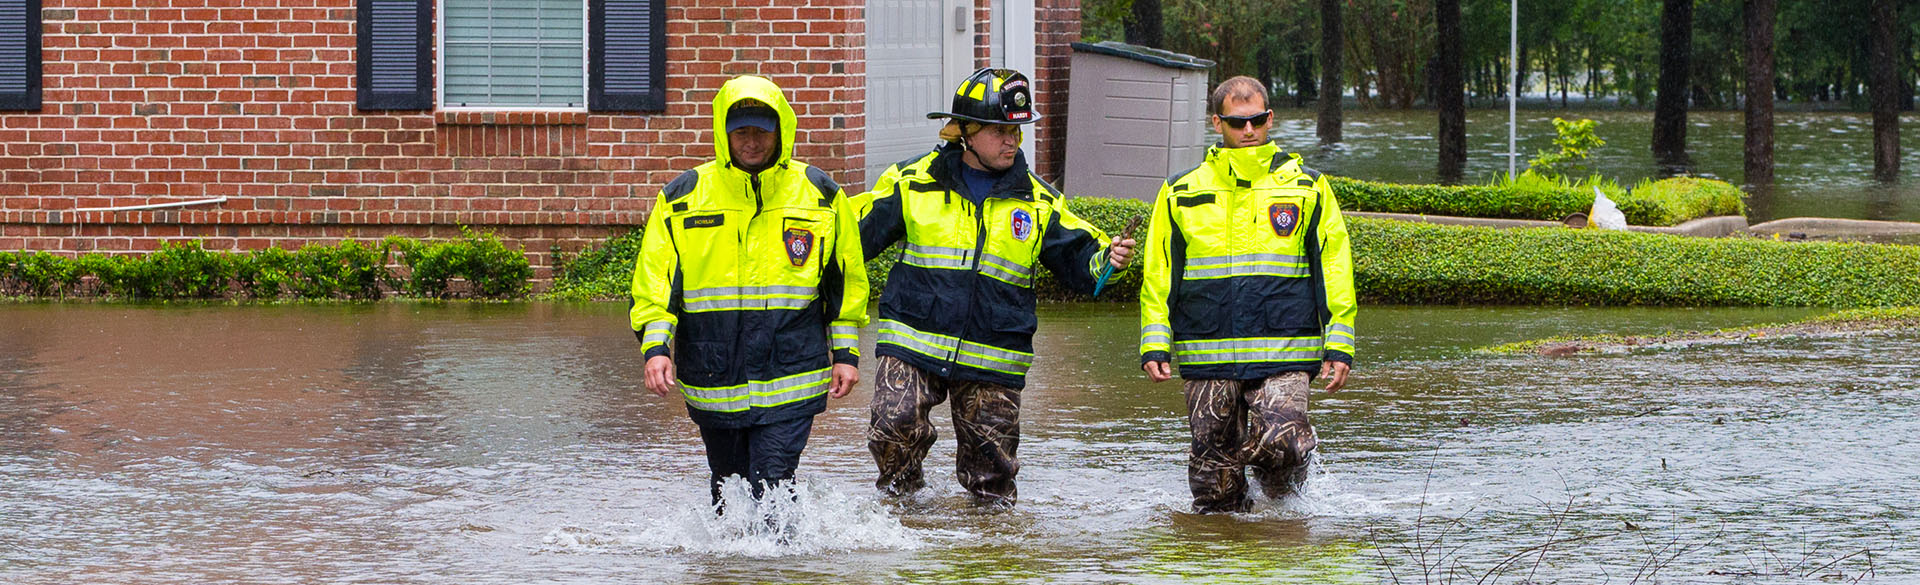 Three firefighters clad in black and bright yellow gear wade through knee-deep water while staying close together